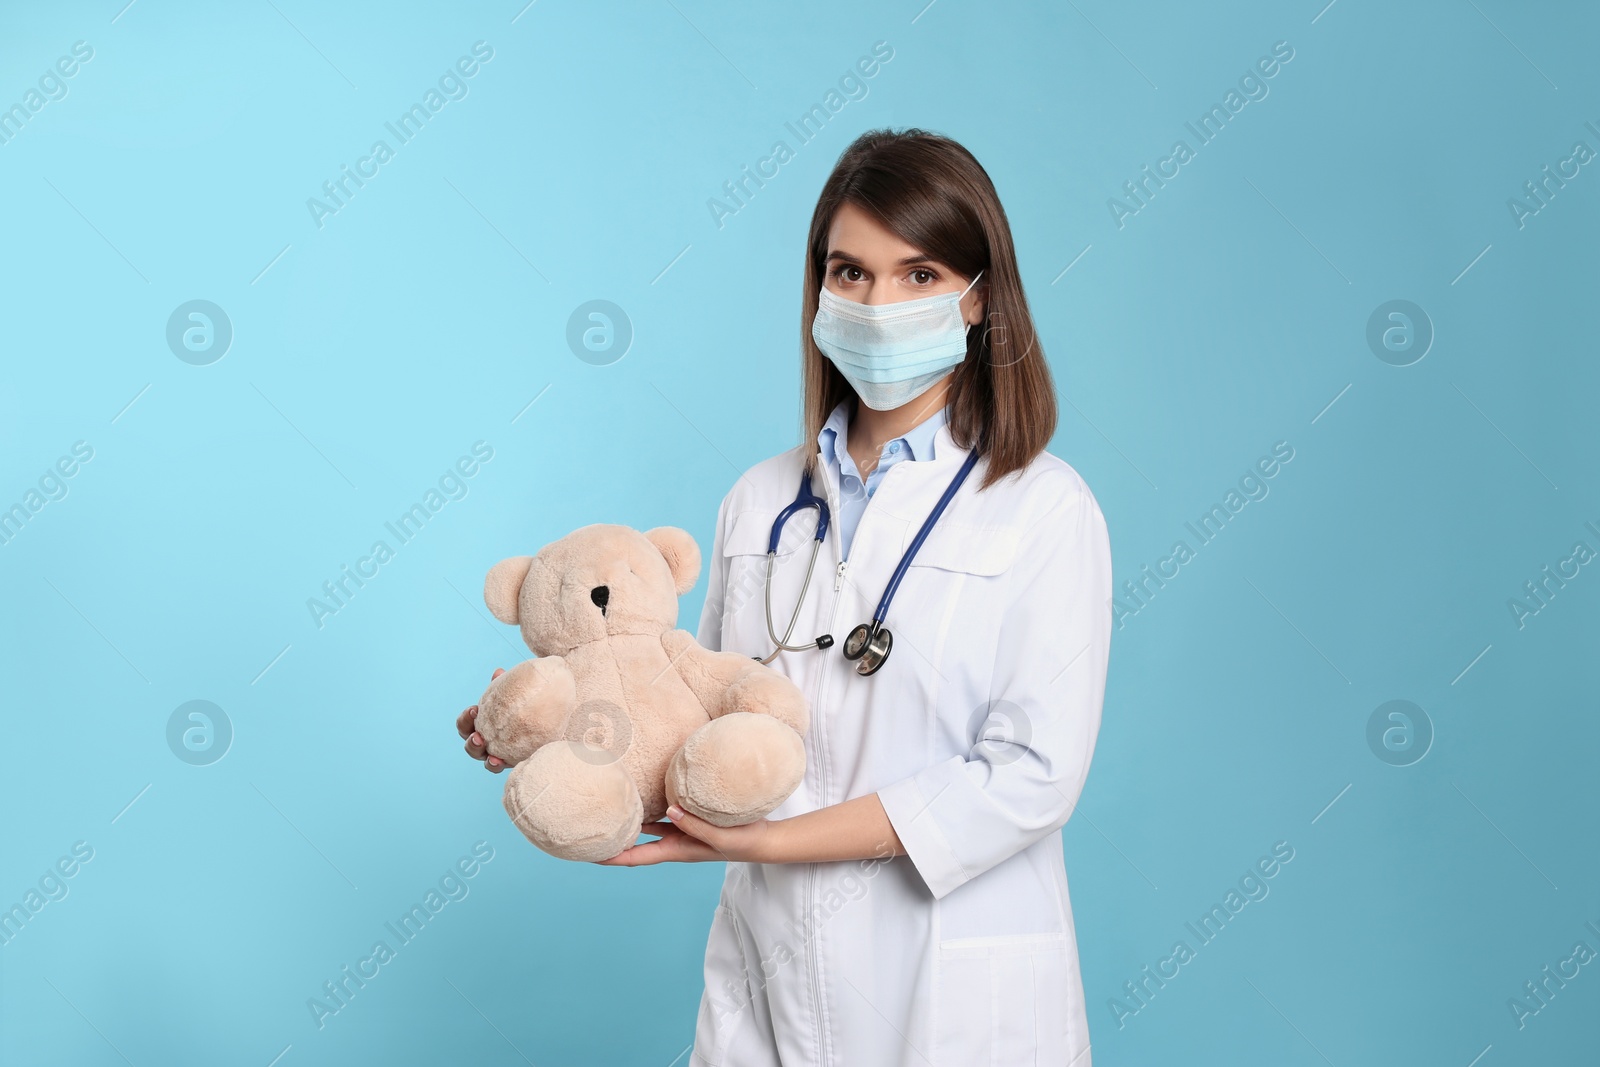 Photo of Pediatrician in protective mask with teddy bear on light blue background